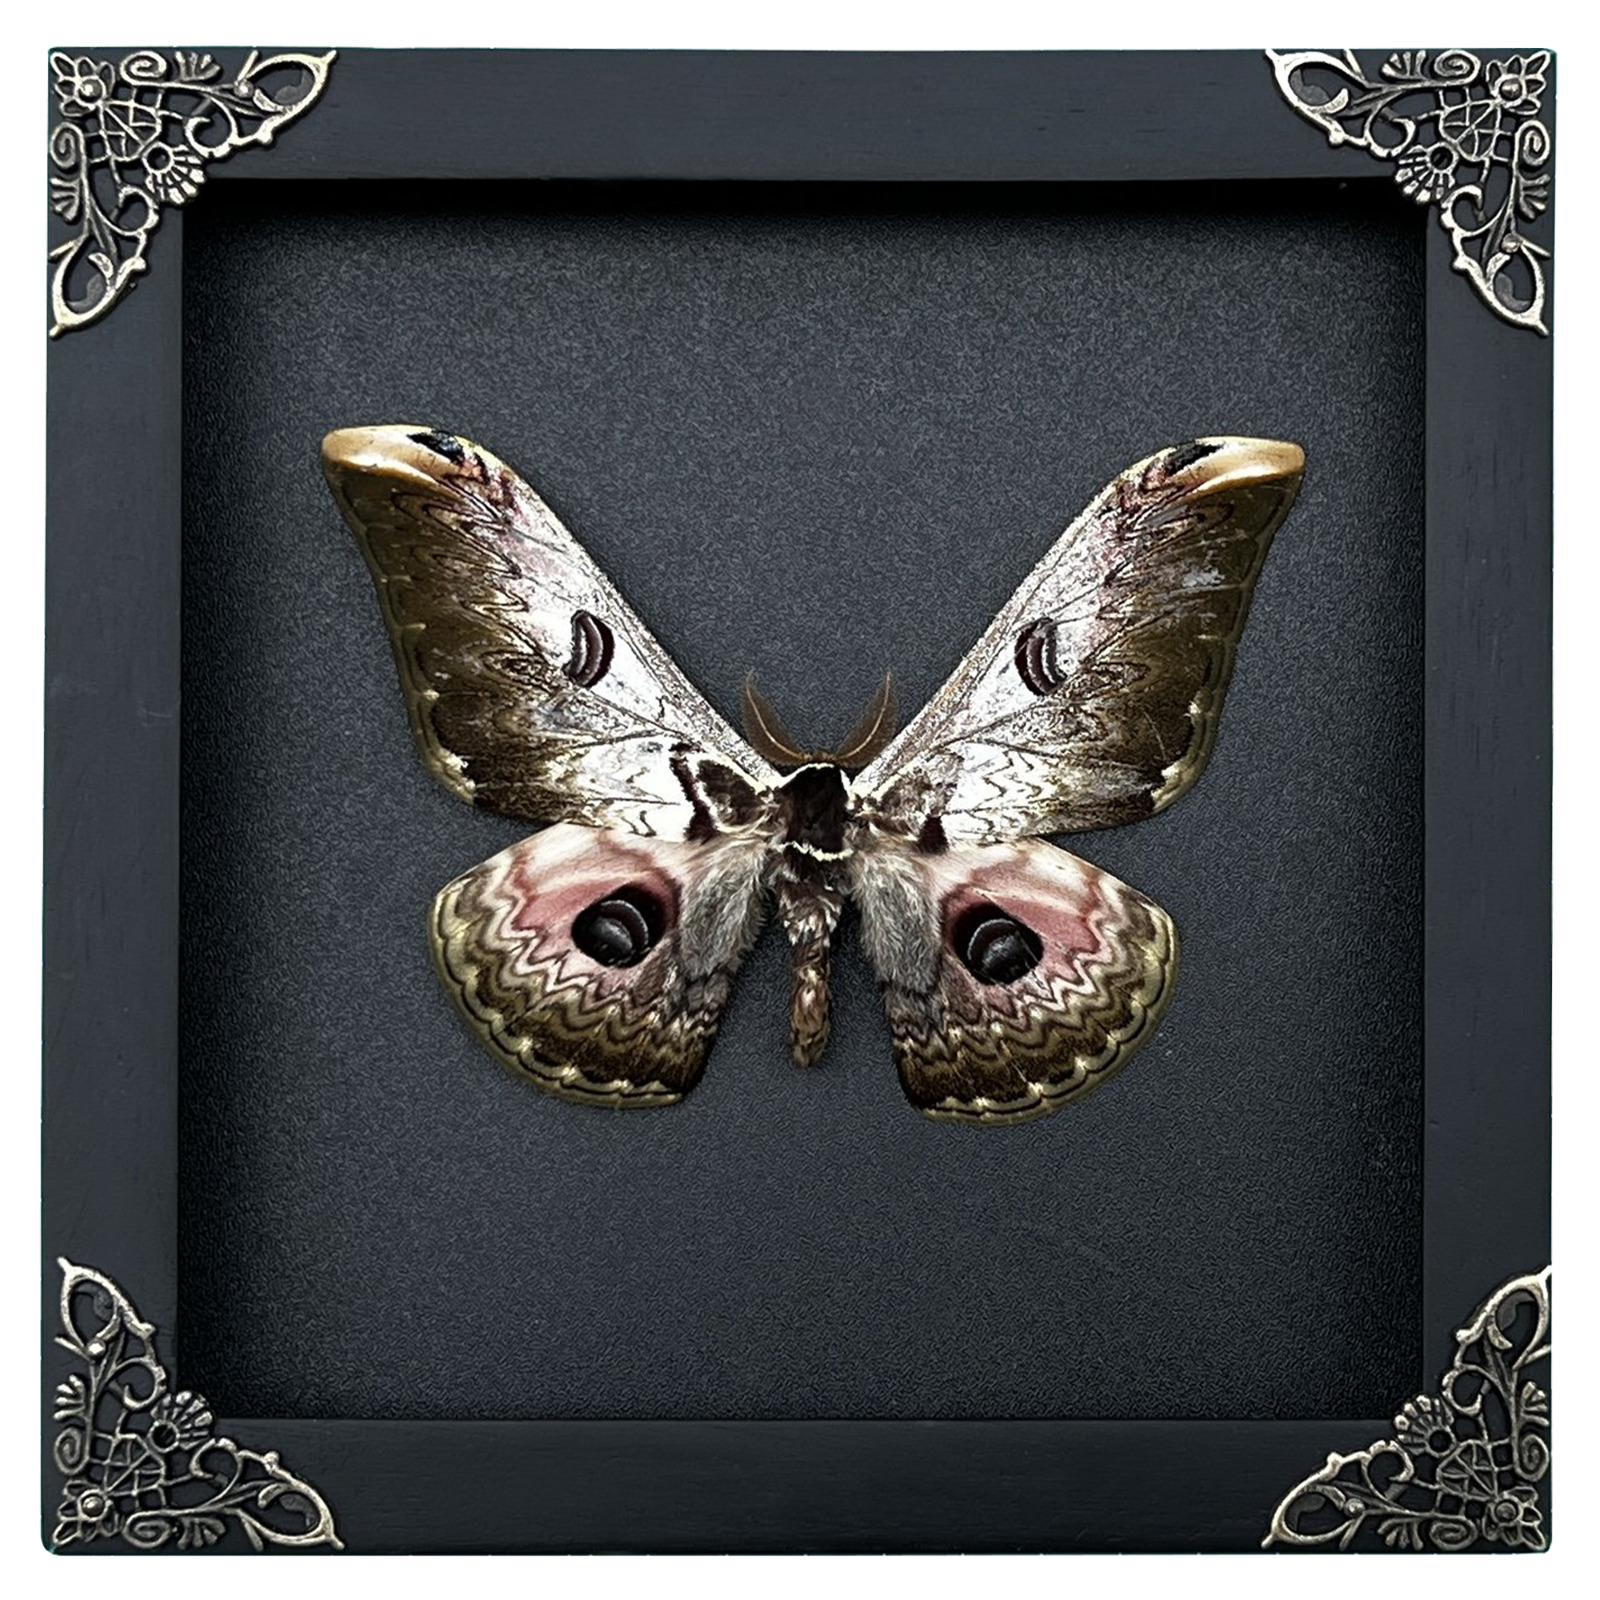 Real Dead Framed Moth Insect Frame Taxidermy Taxadermy Wall Art Decoration